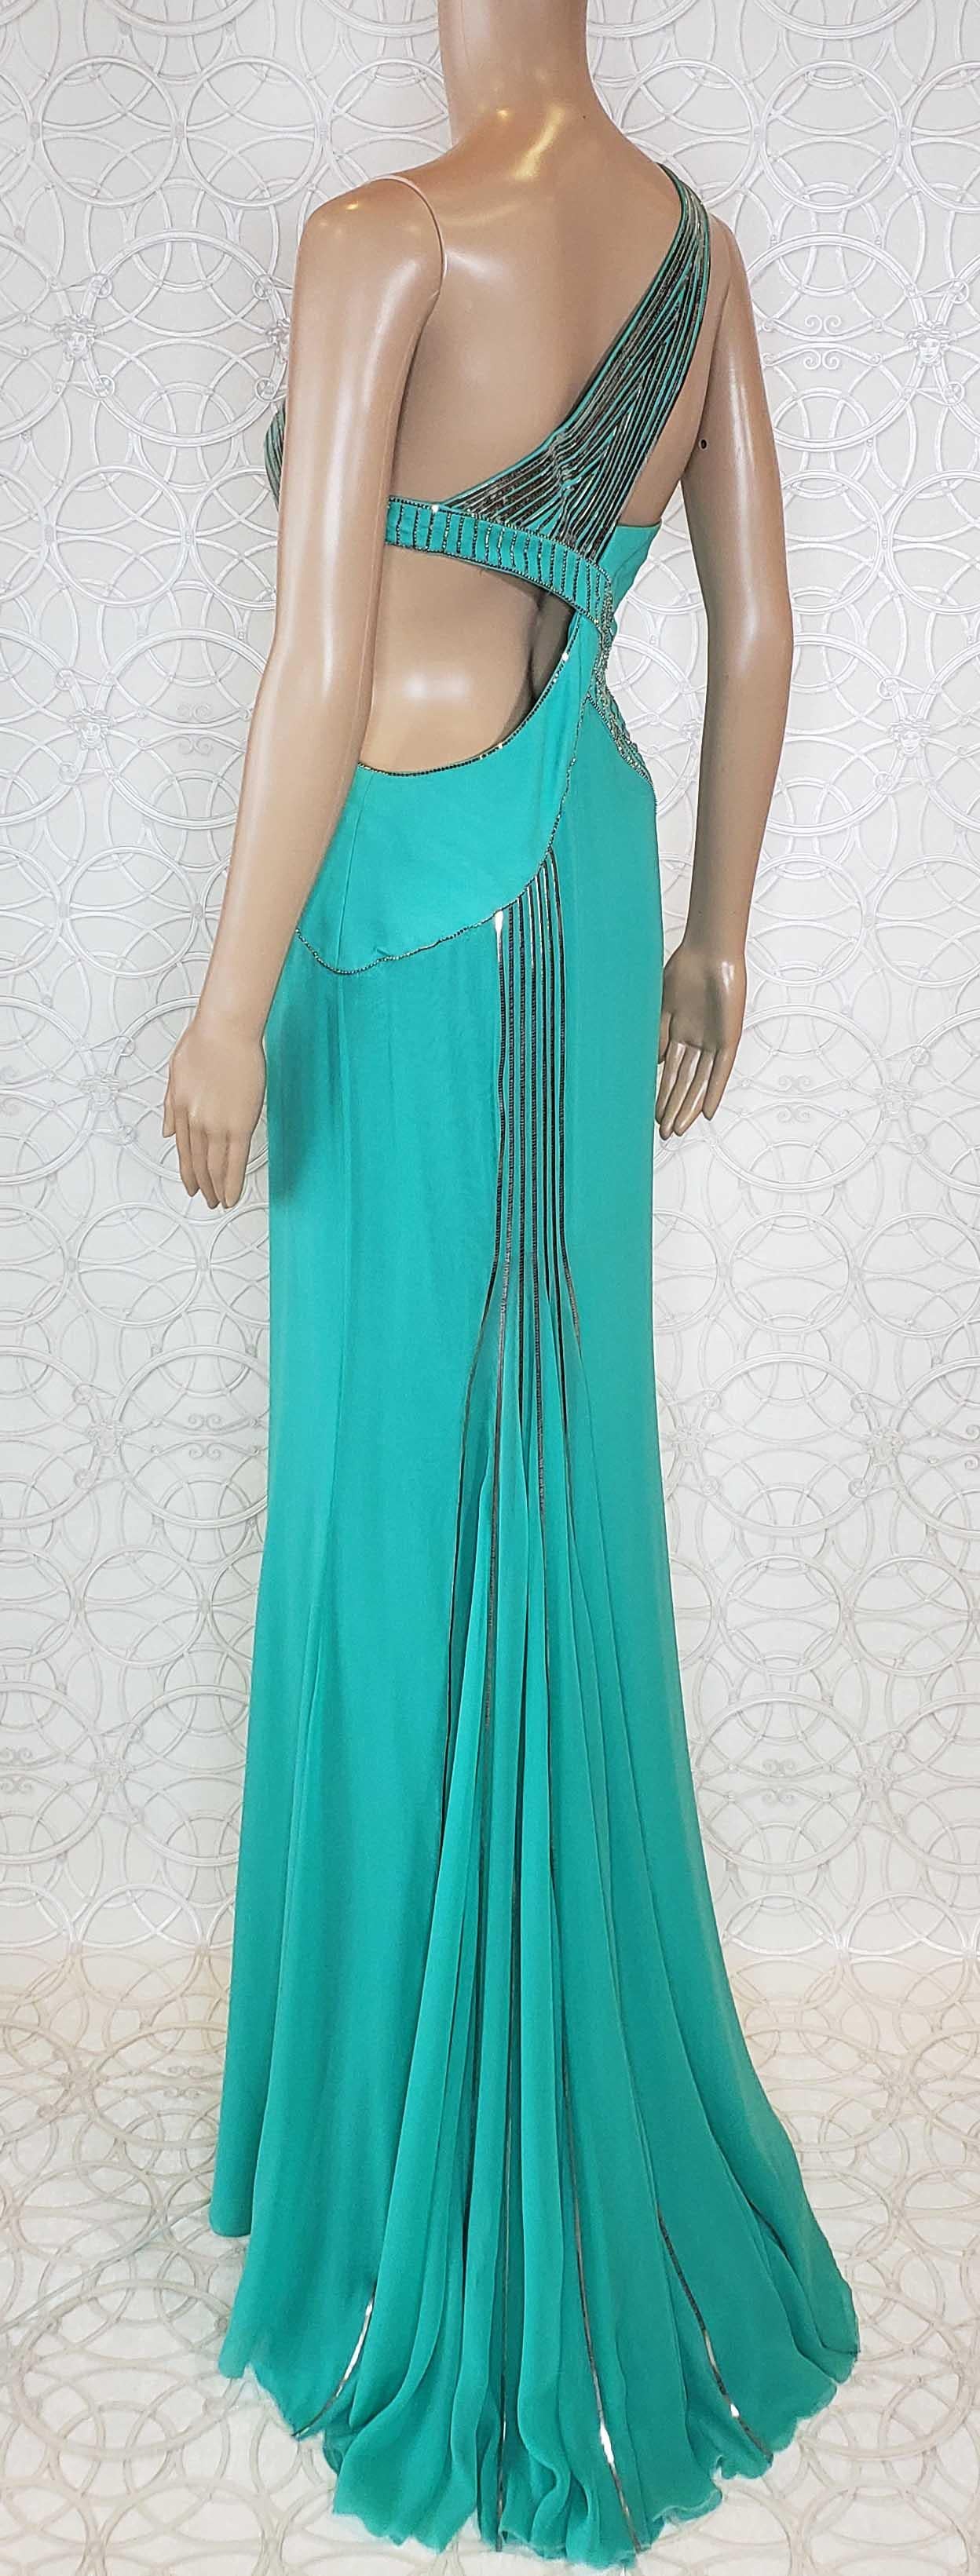 S/2010 L# 46 VERSACE AQUAMARINE EMBELLISHED ONE SHOULDER LONG DRESS Gown 40, 42 In New Condition For Sale In Montgomery, TX